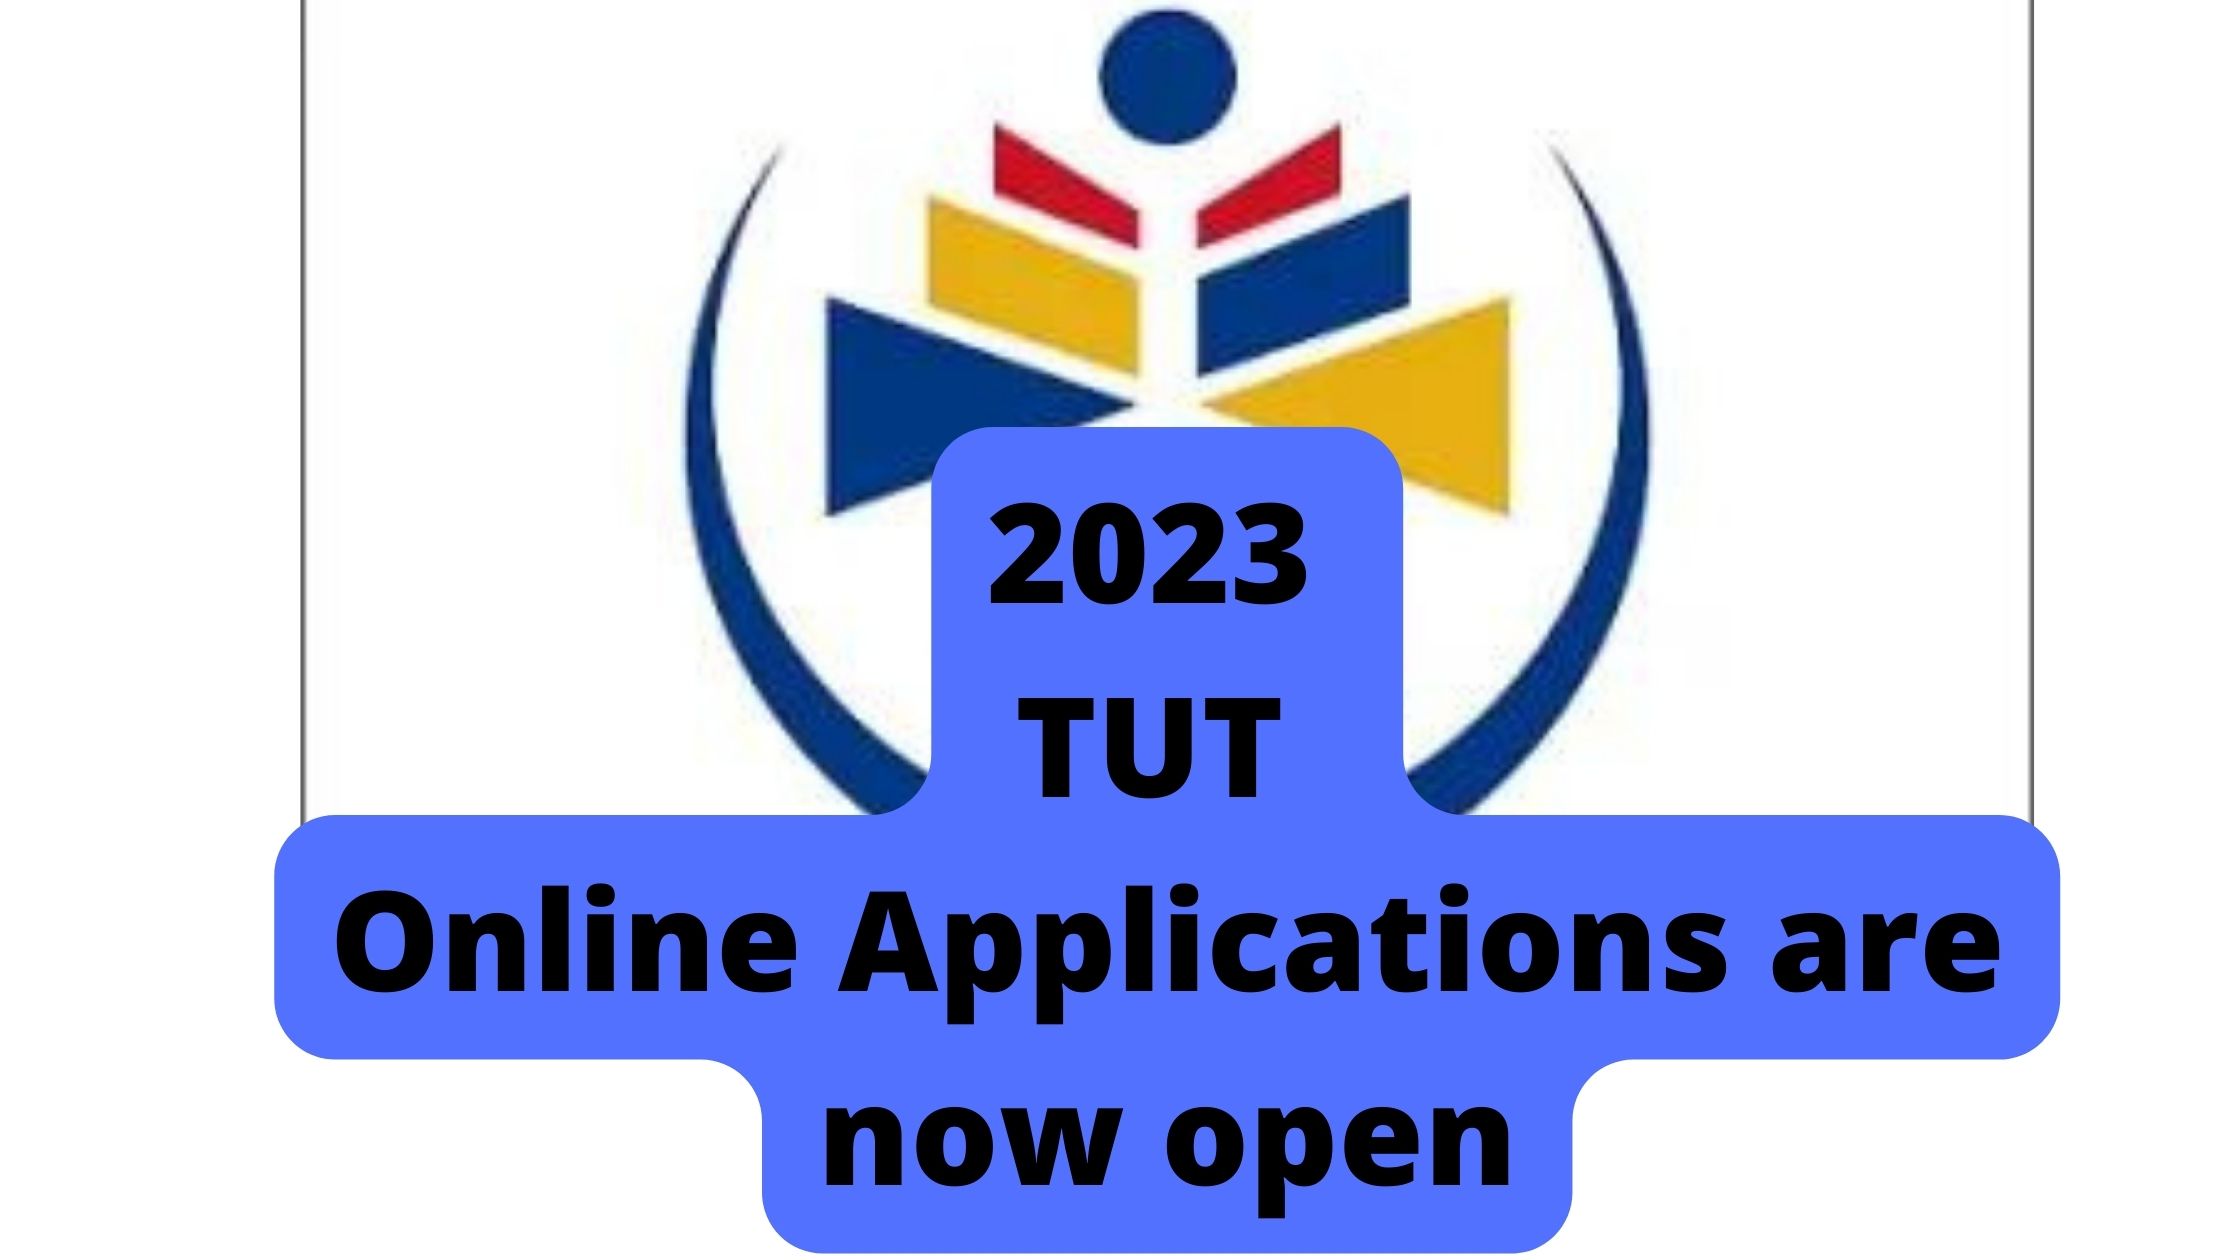 2023 TUT Online Applications are now open